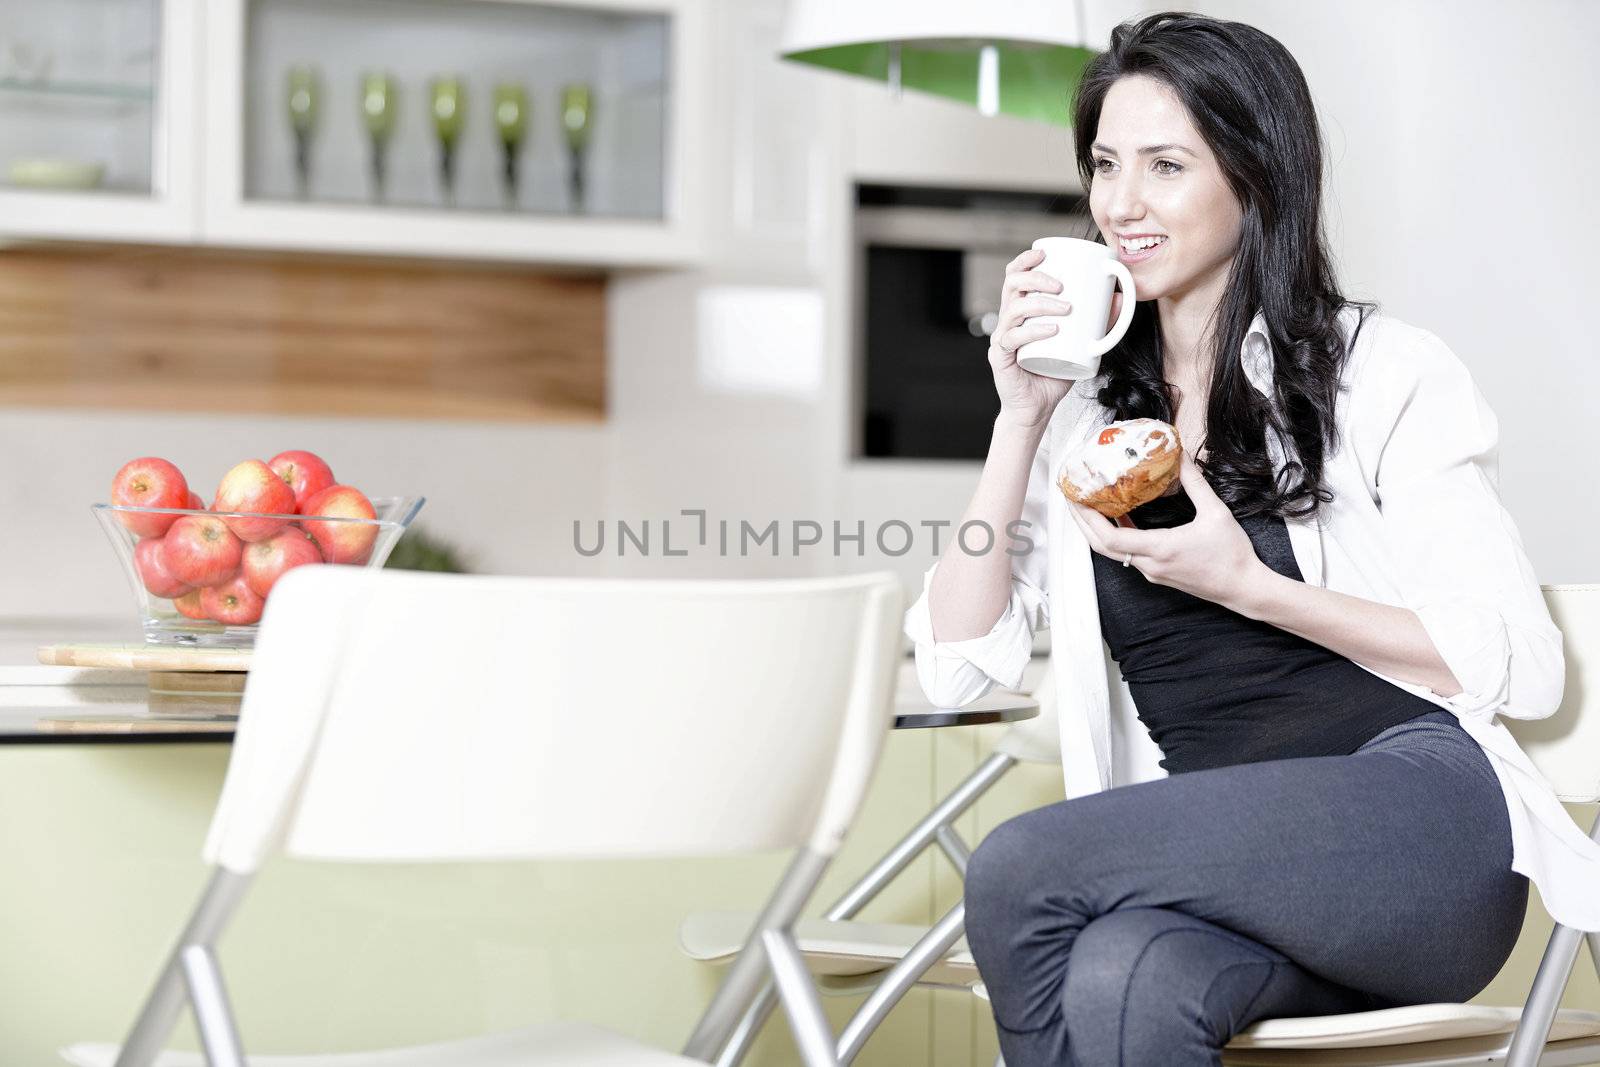 Beautiful young woman taking a break in her kitchen with a coffee and cake.